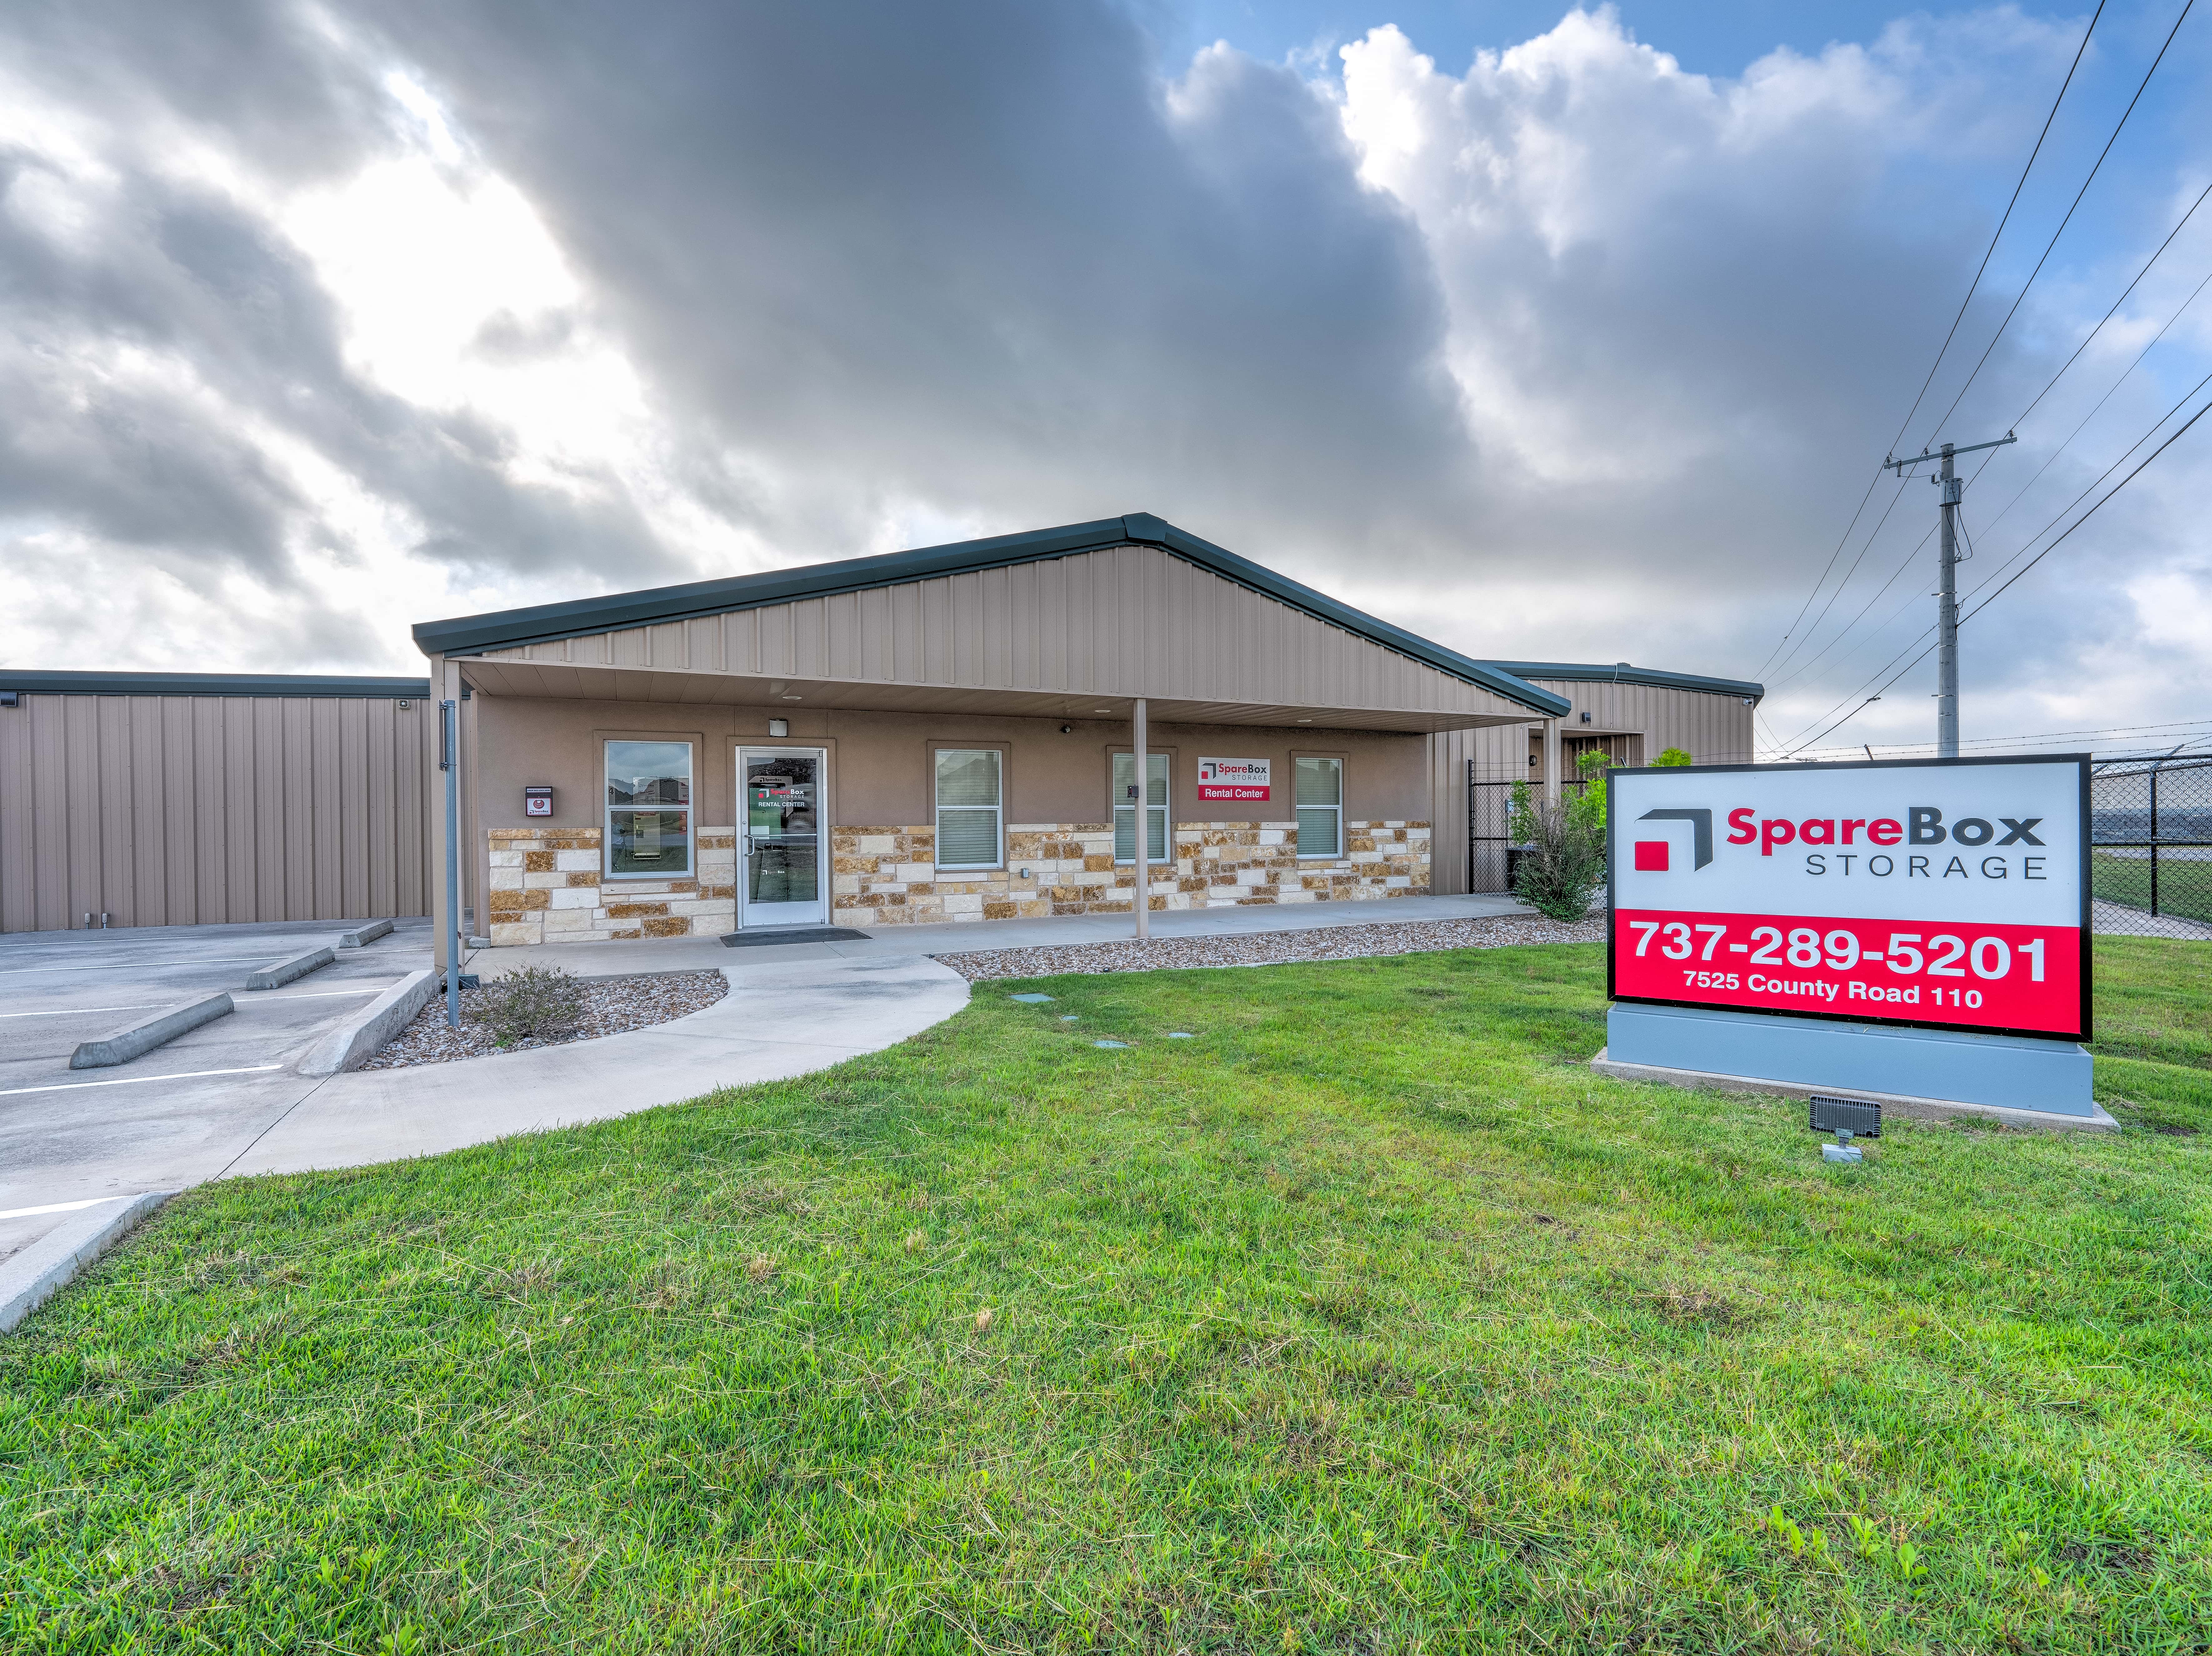 Meet all of your self storage needs in Round Rock, TX at our 7525 County Road 110 location | SpareBox Storage